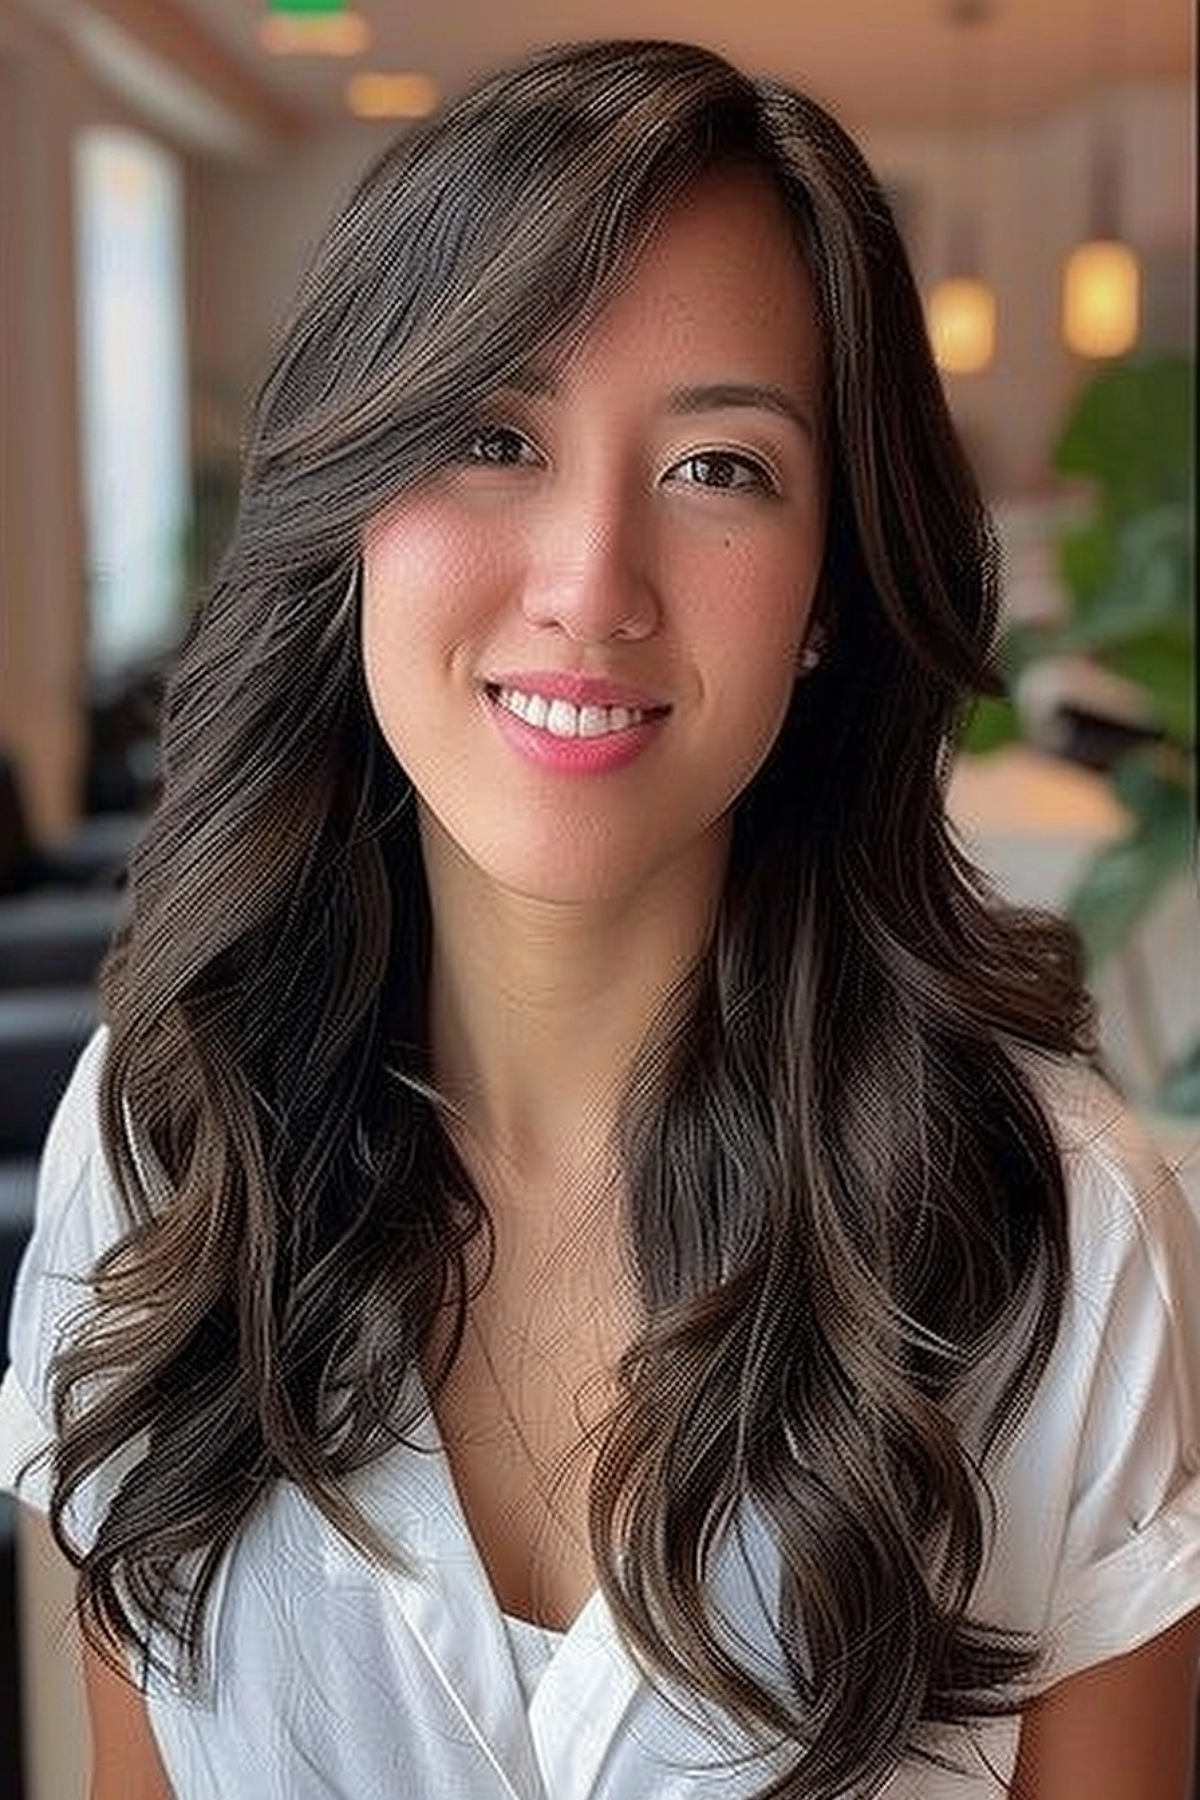 Long layered hairstyles with side swept bangs add volume and elegance, making them perfect for thick hair.